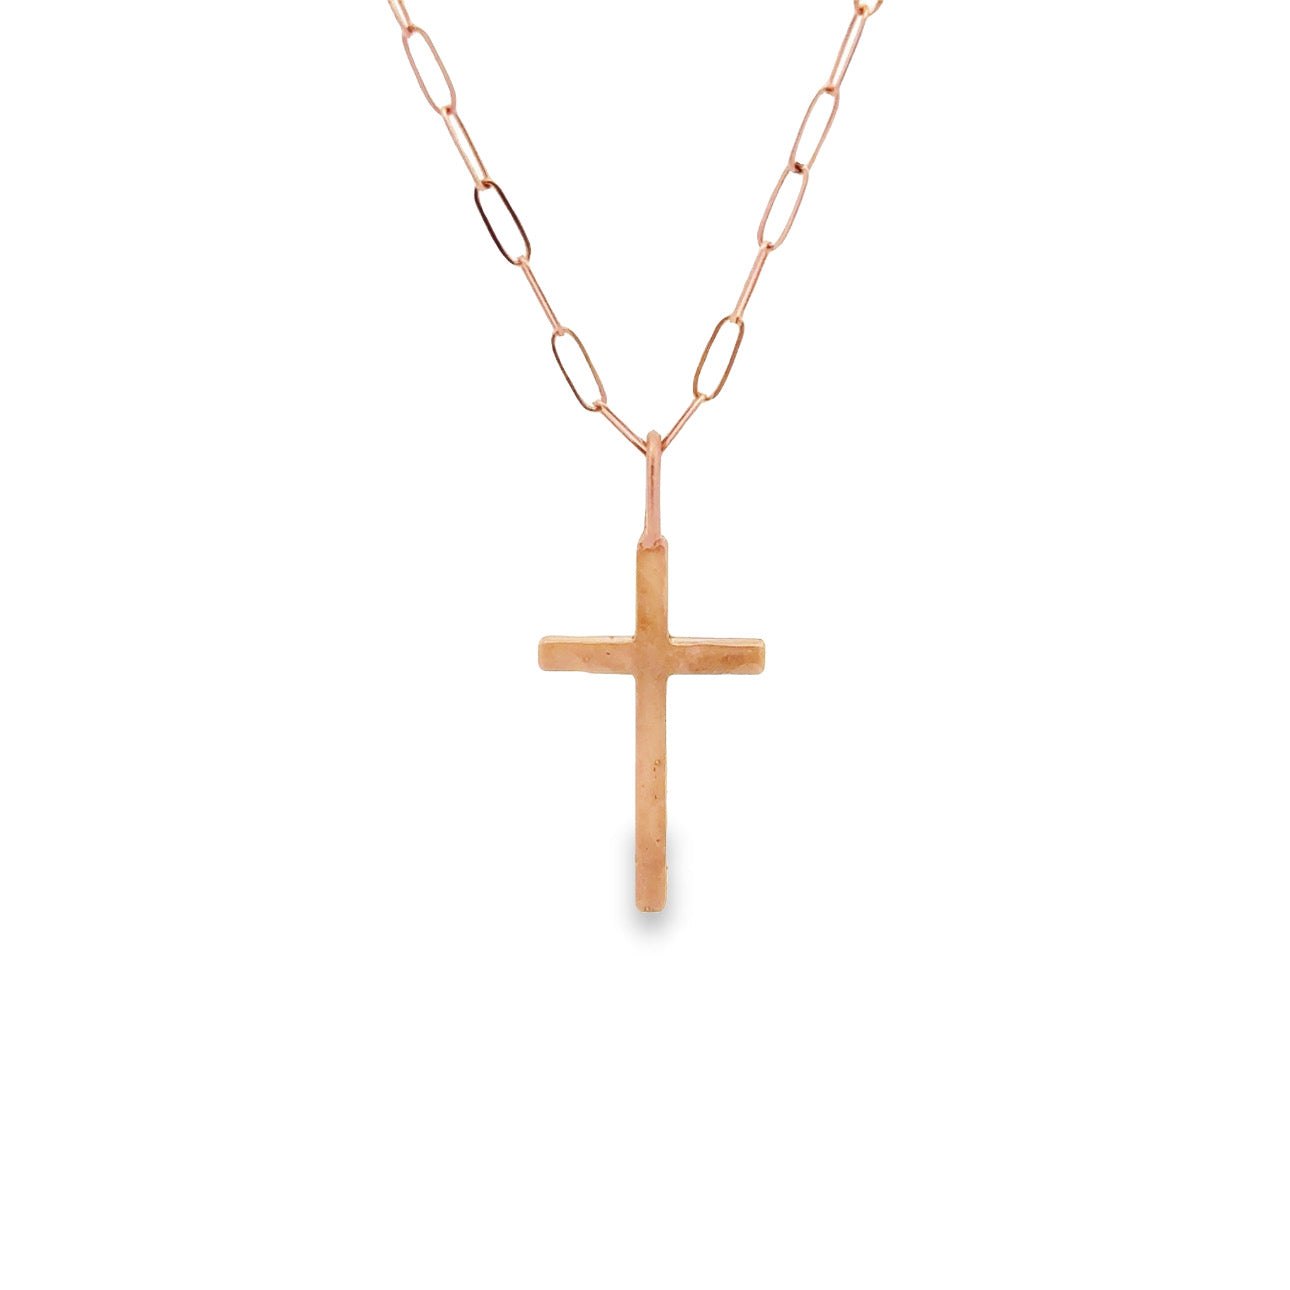 WD561 - 14kt Hammered Gold Cross Pendant (Chain sold Separately)